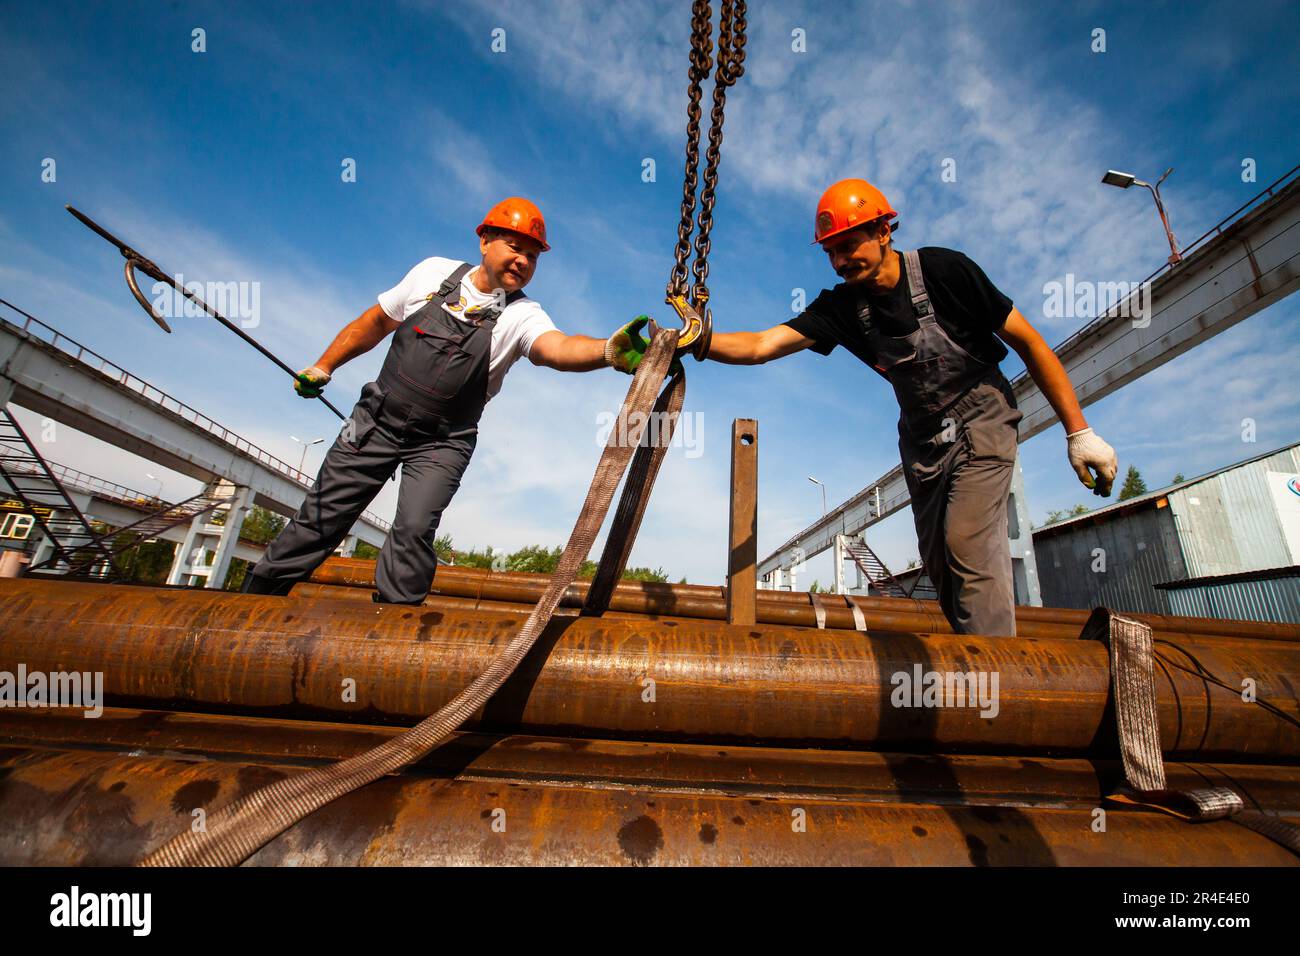 Podolsk, Moscow province - August 02, 2021: Pipes warehouse. Workers installs straps of overhead crane Stock Photo